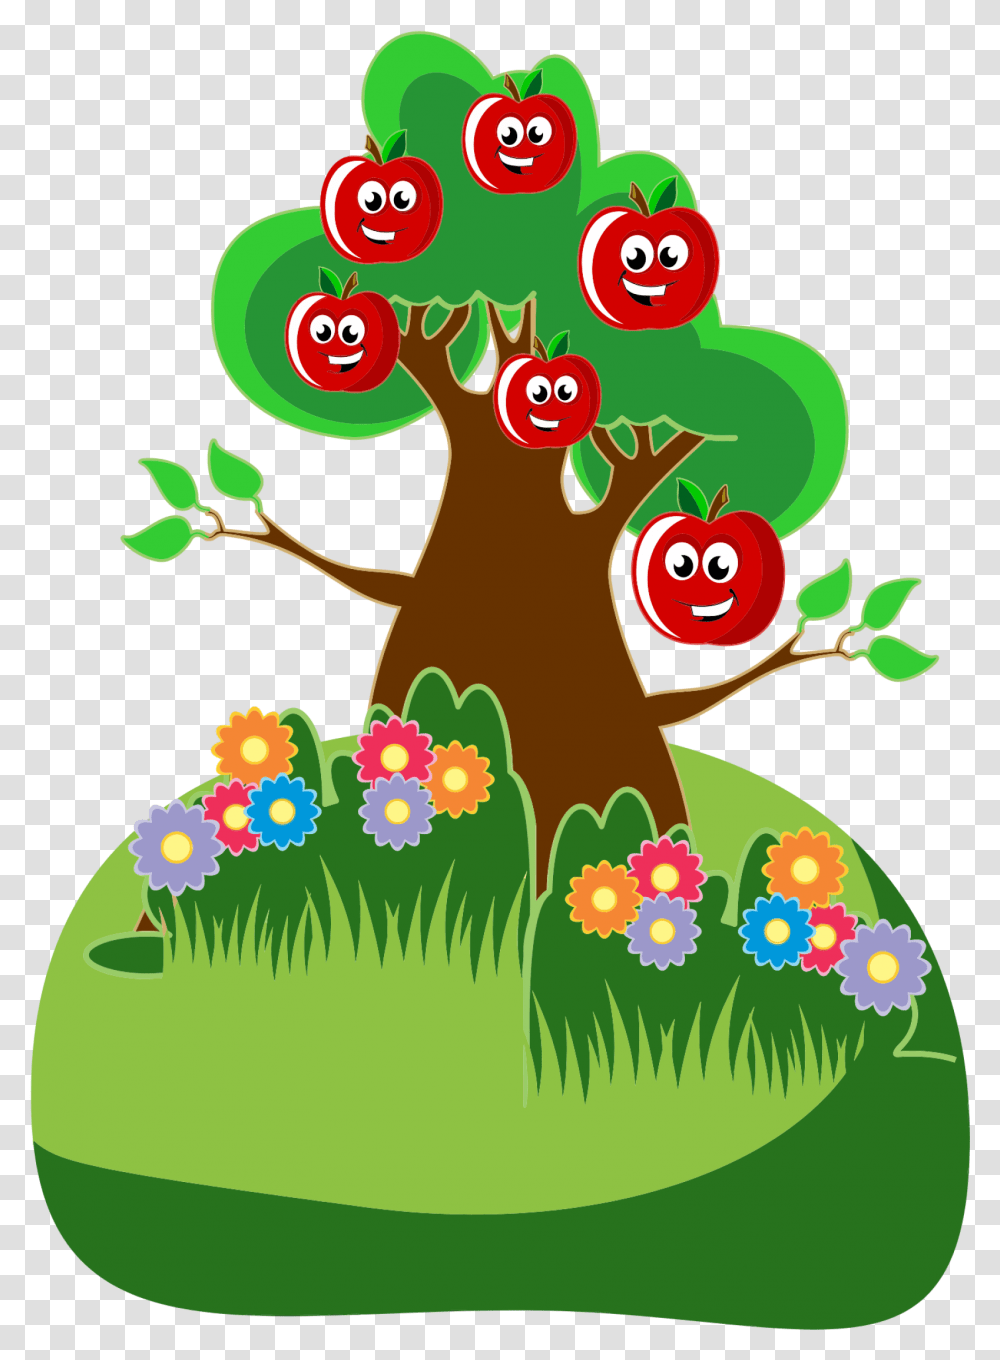 Apple Clip Arts For Web Clip Arts Free Backgrounds Apple Tree And Our Parents, Plant, Graphics, Birthday Cake, Dessert Transparent Png